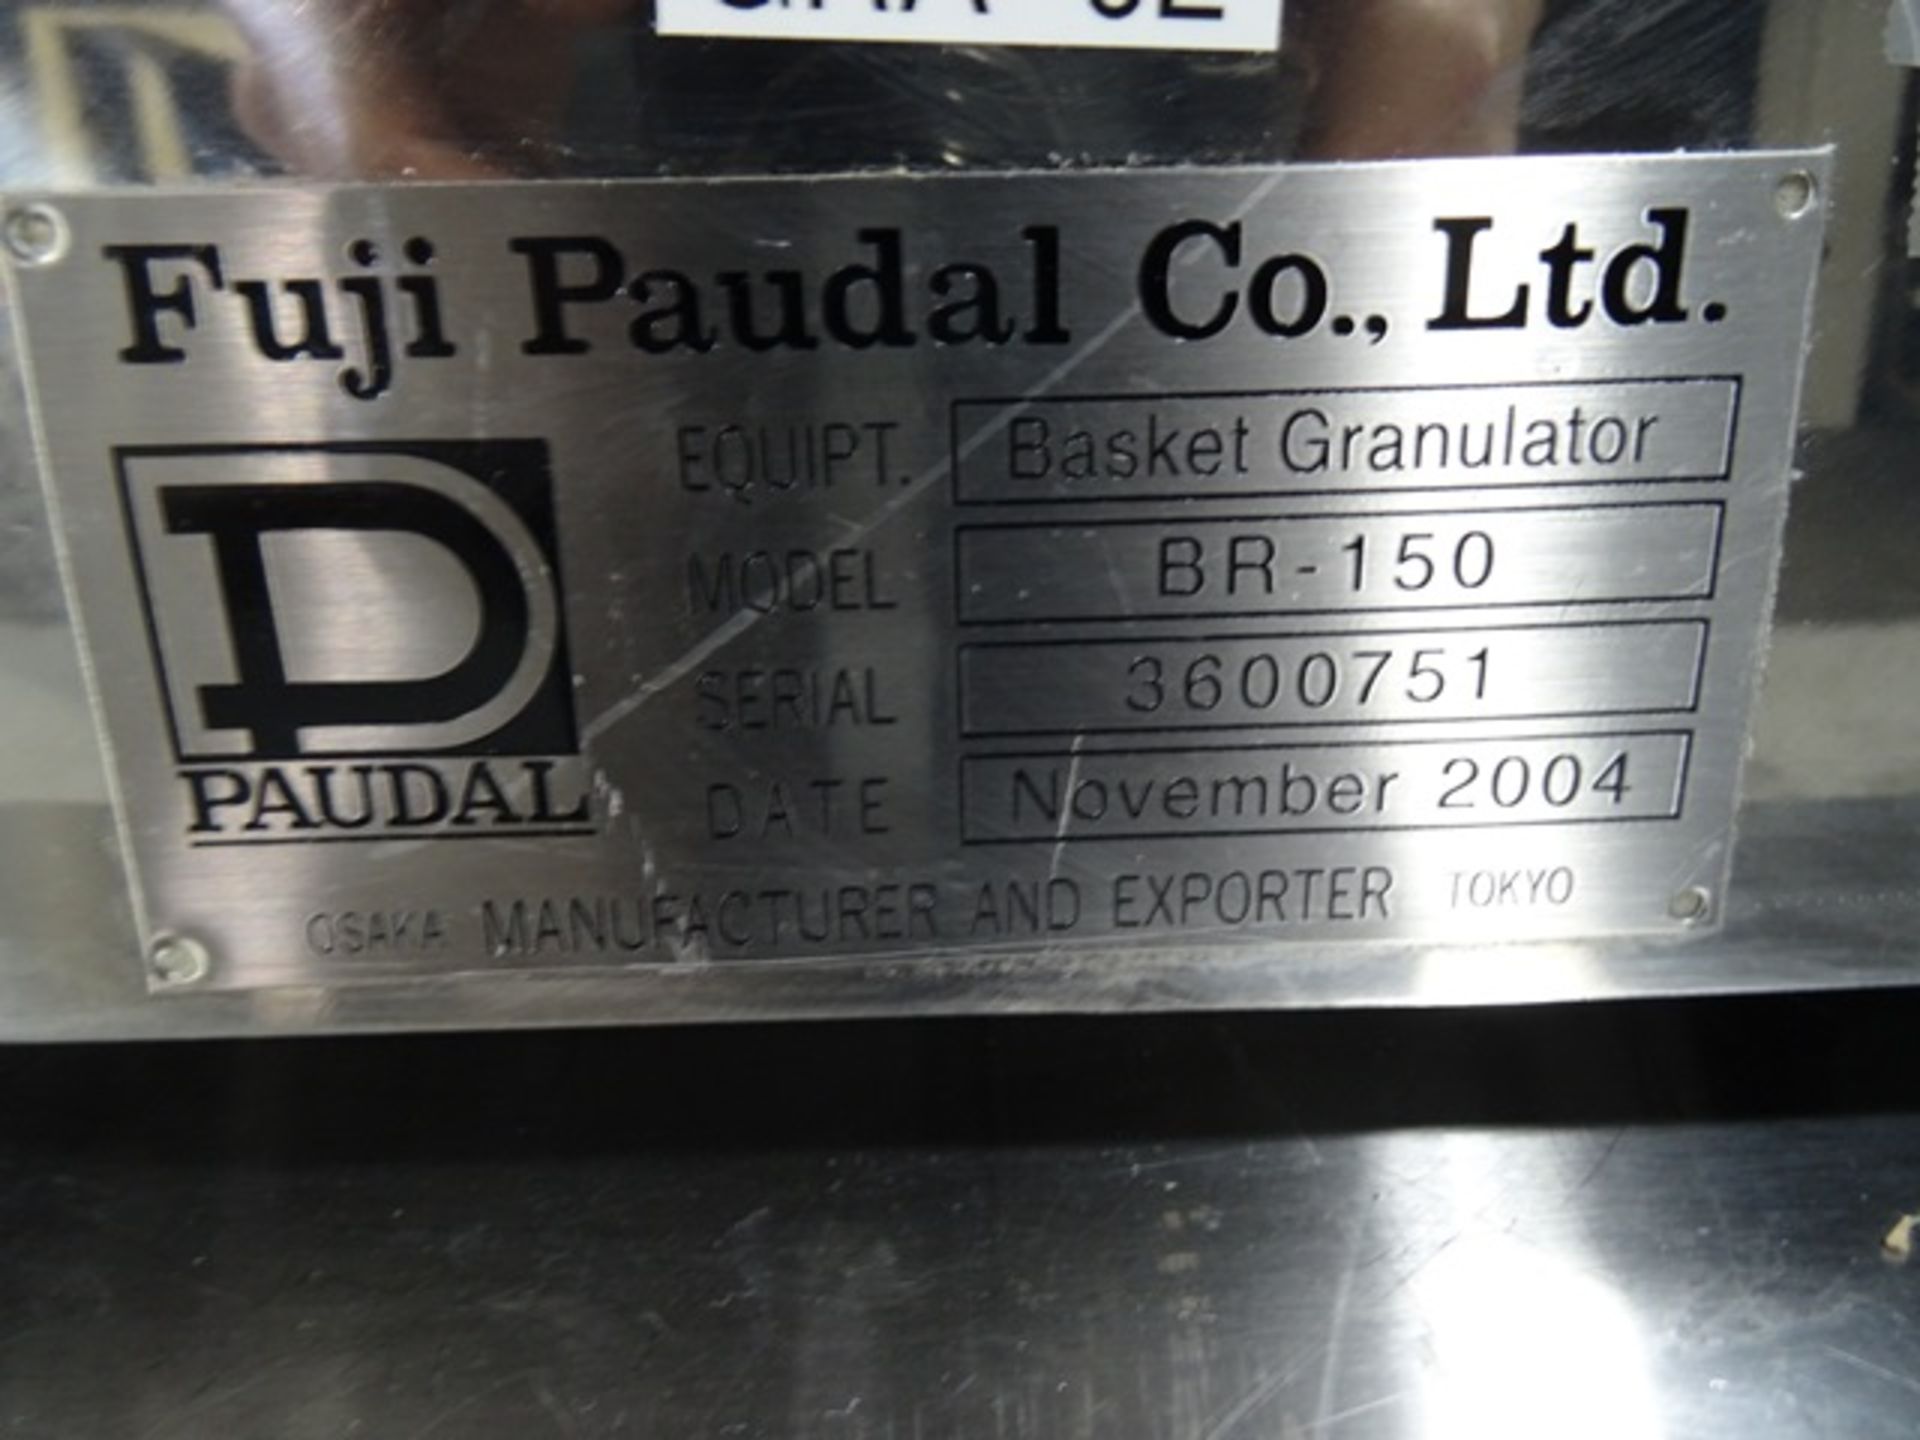 Fuji Paudal LCI Basket Granulator, model BR-150, stainless steel construction, with feed hopper, - Image 7 of 21